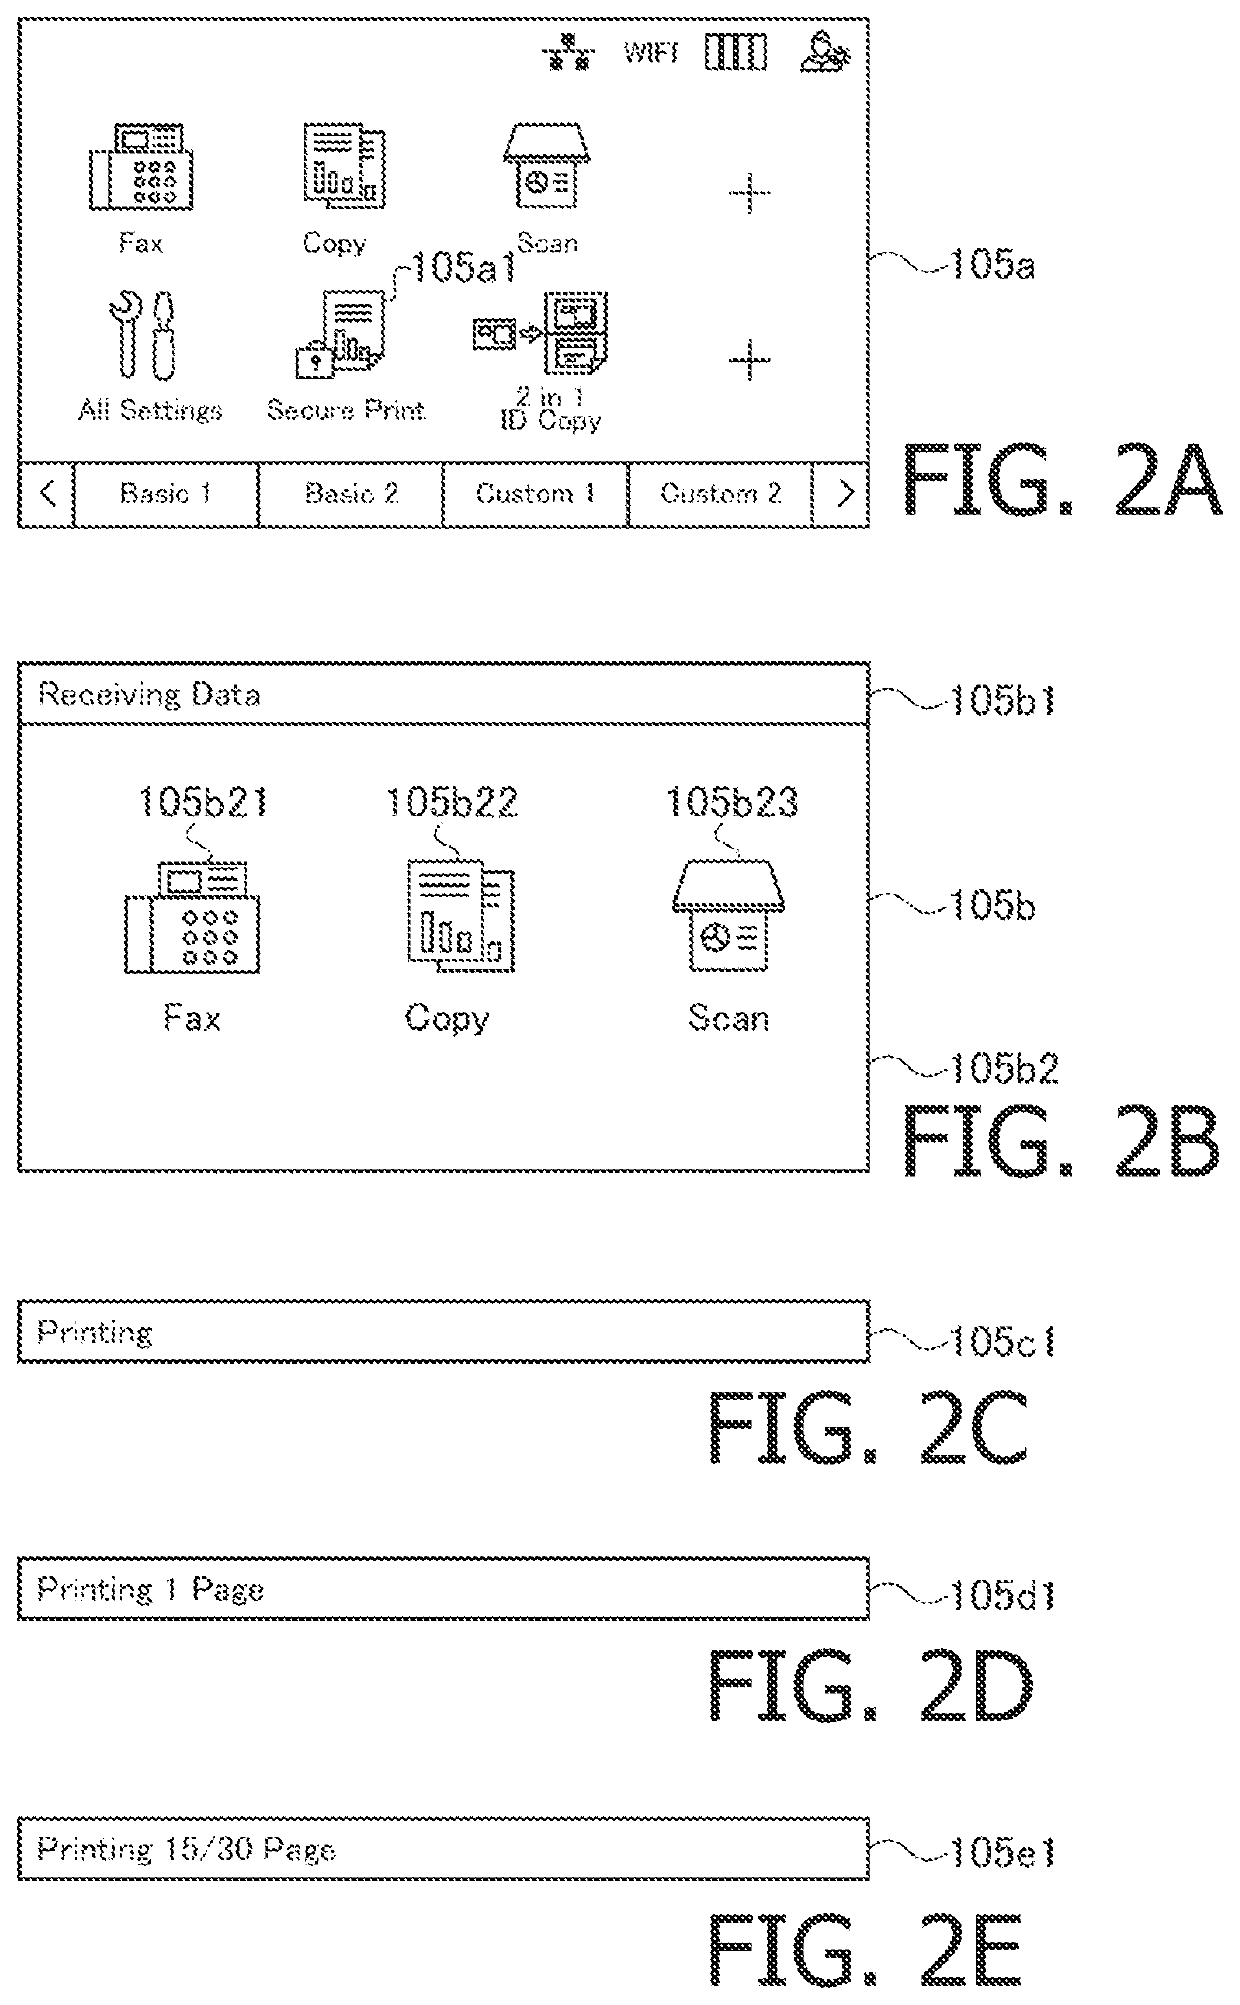 Image processing apparatus and non-transitory computer-readable recording medium therefor